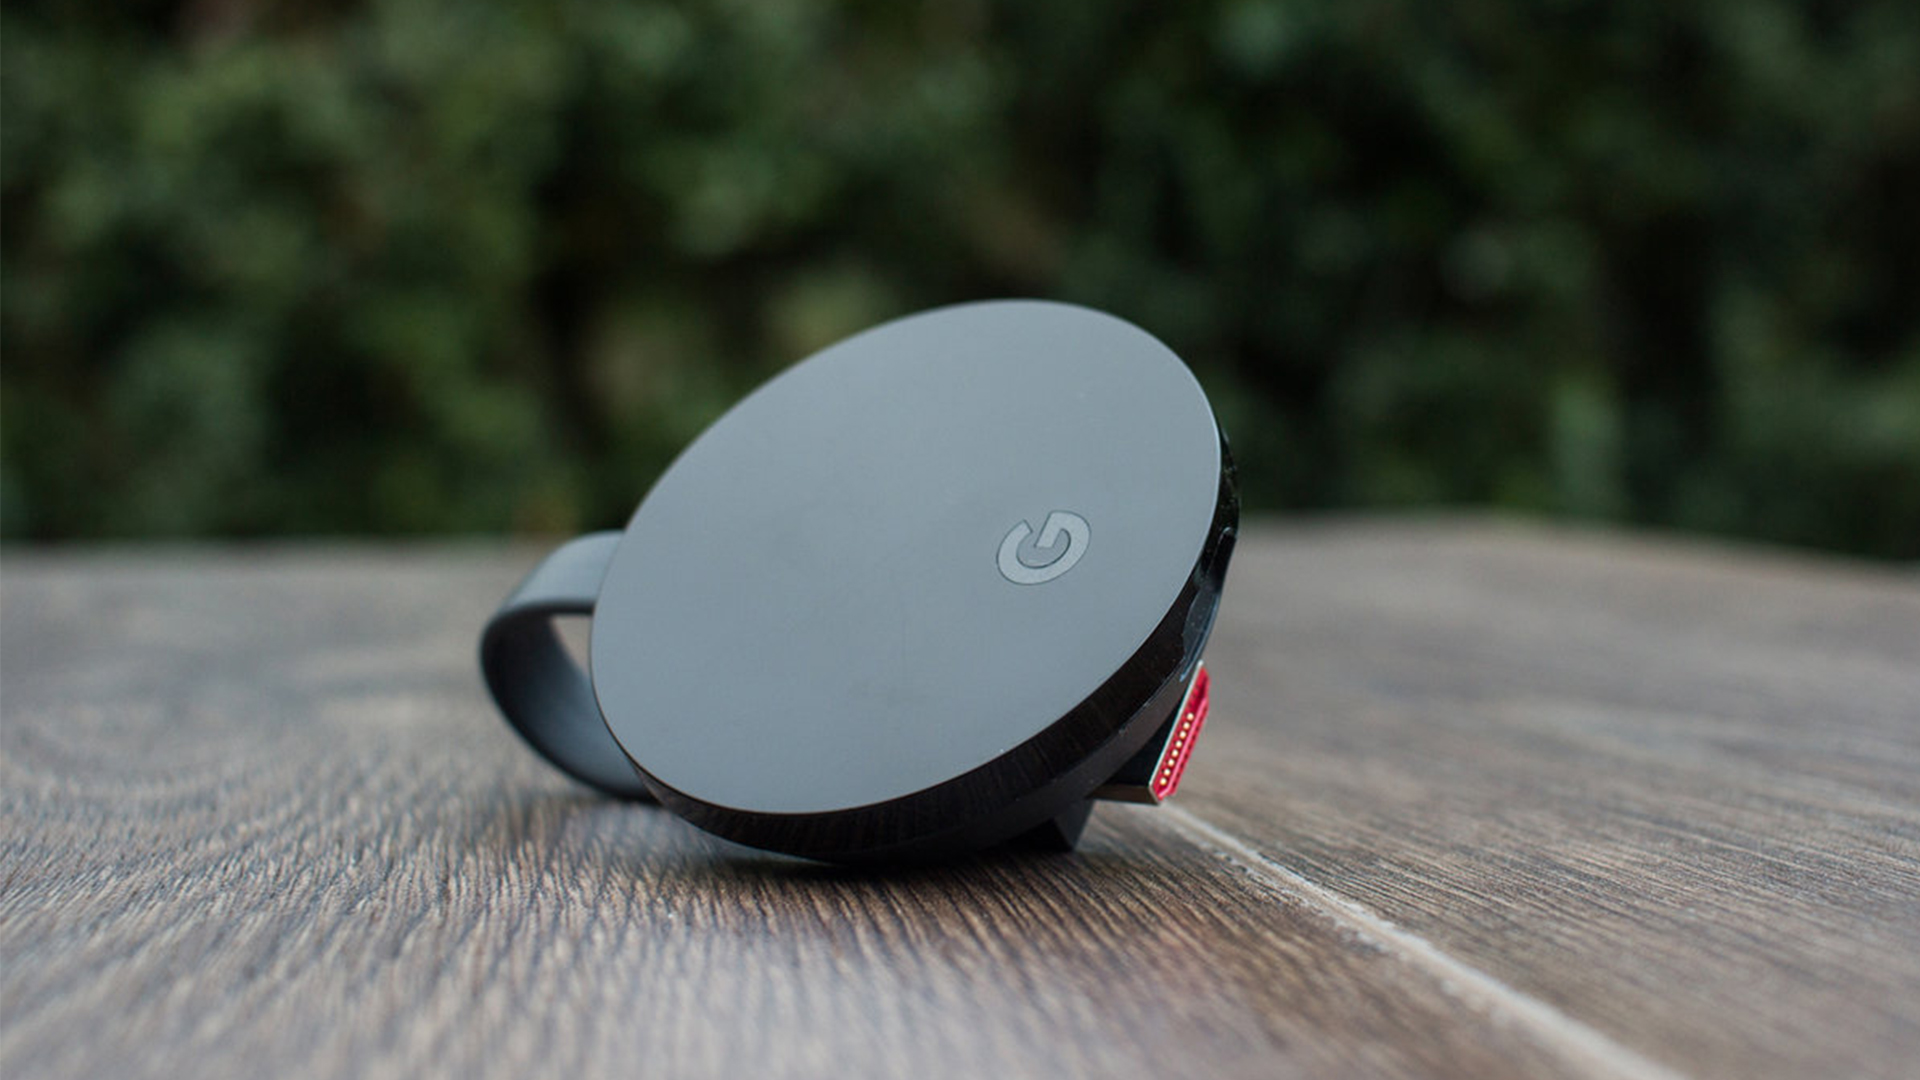 Google is developing a new Chromecast Ultra with remote control